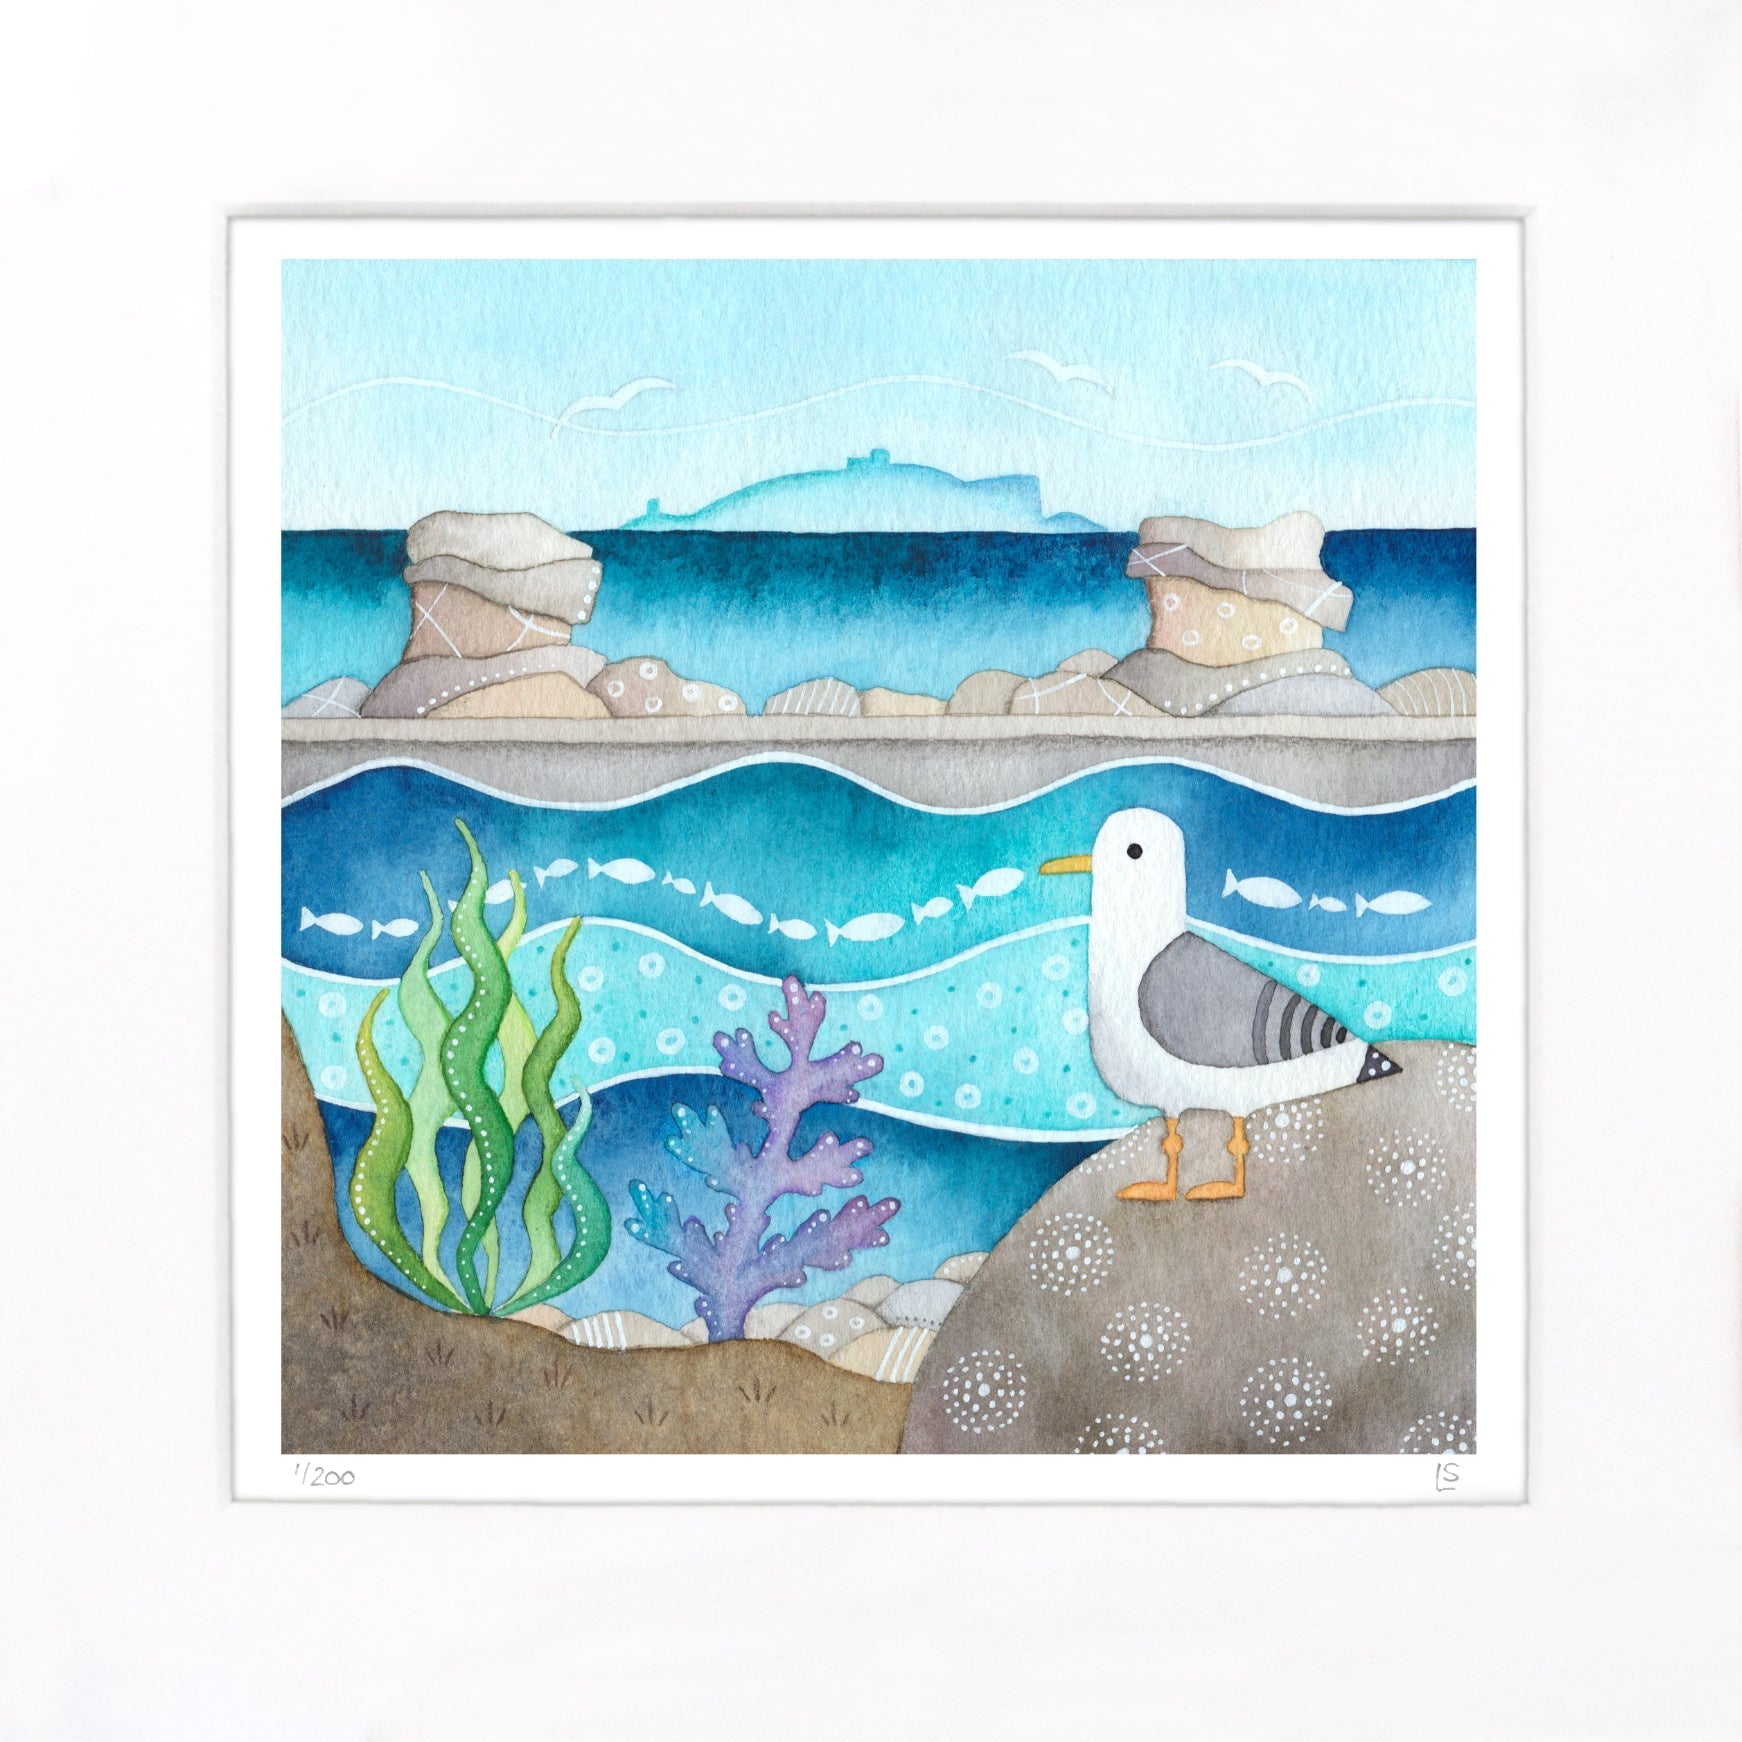 Seagull at Cellardyke Pool Print - Seaside Watercolour Painting - Limited Edition Signed Art - East Neuk Beach Crafts